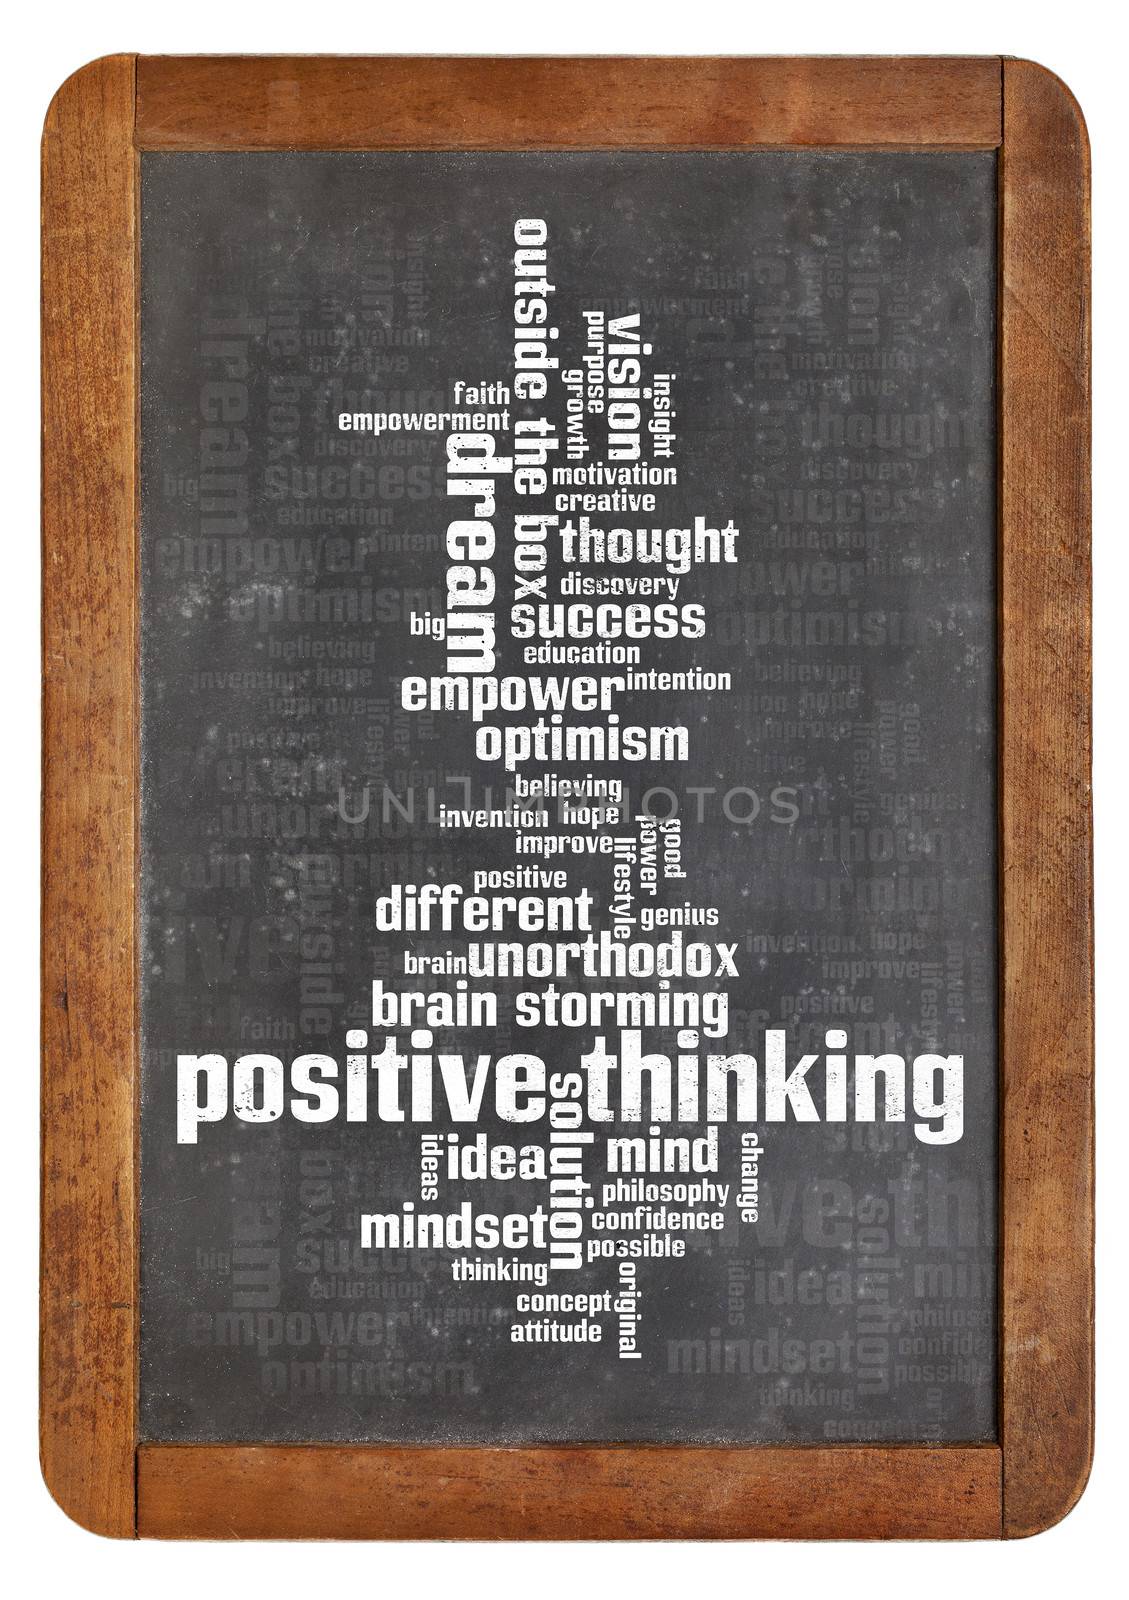 cloud of words or tags related to positive thinking on a  vintage slate blackboard isolated on white